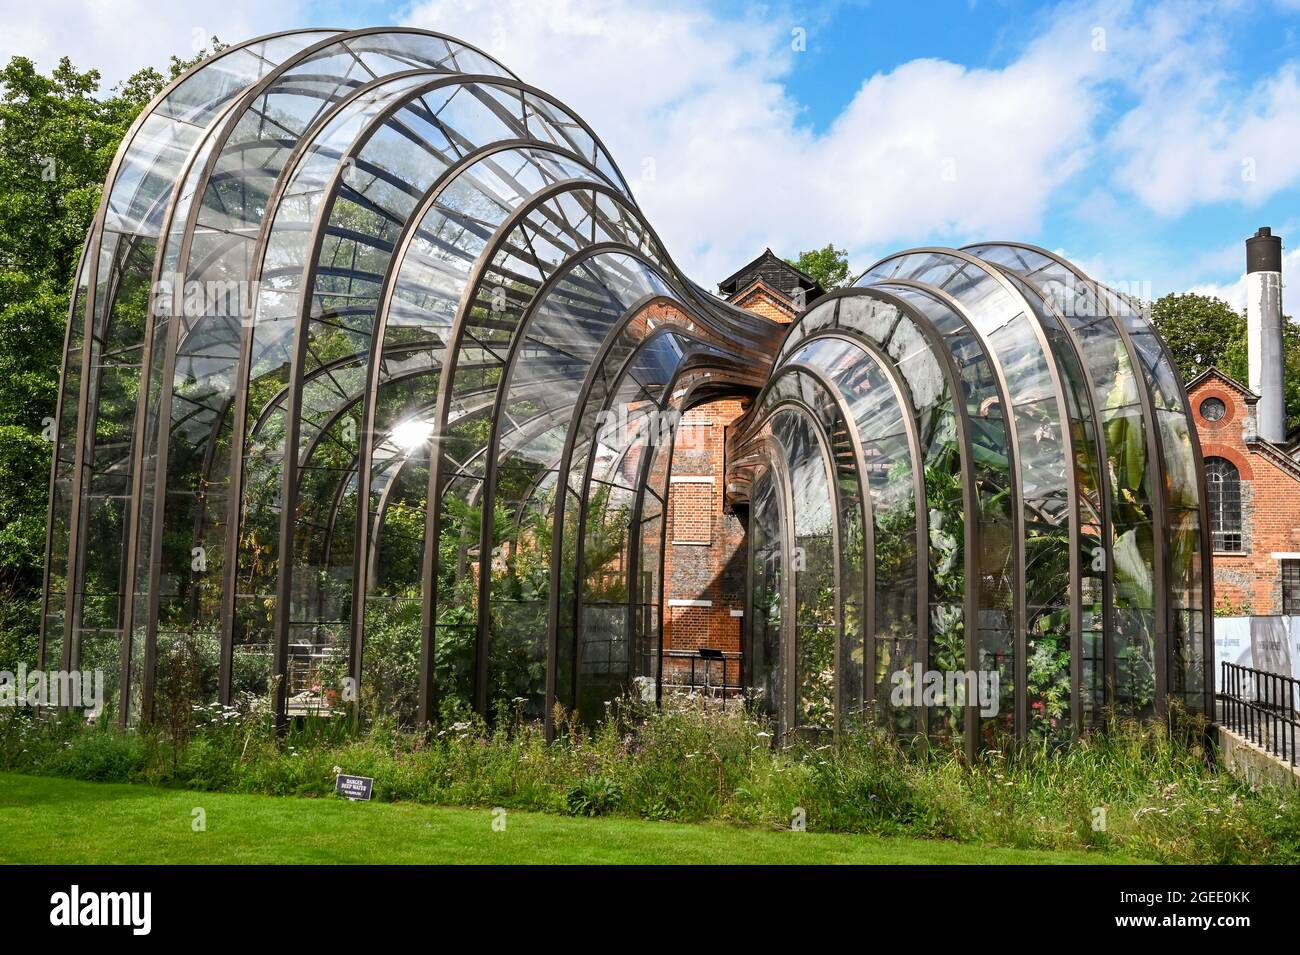 Whitchurch, Hampshire, England - August 2021: Large glasshouses, which from part of the Bombay Sapphire Gin Distillery Stock Photo